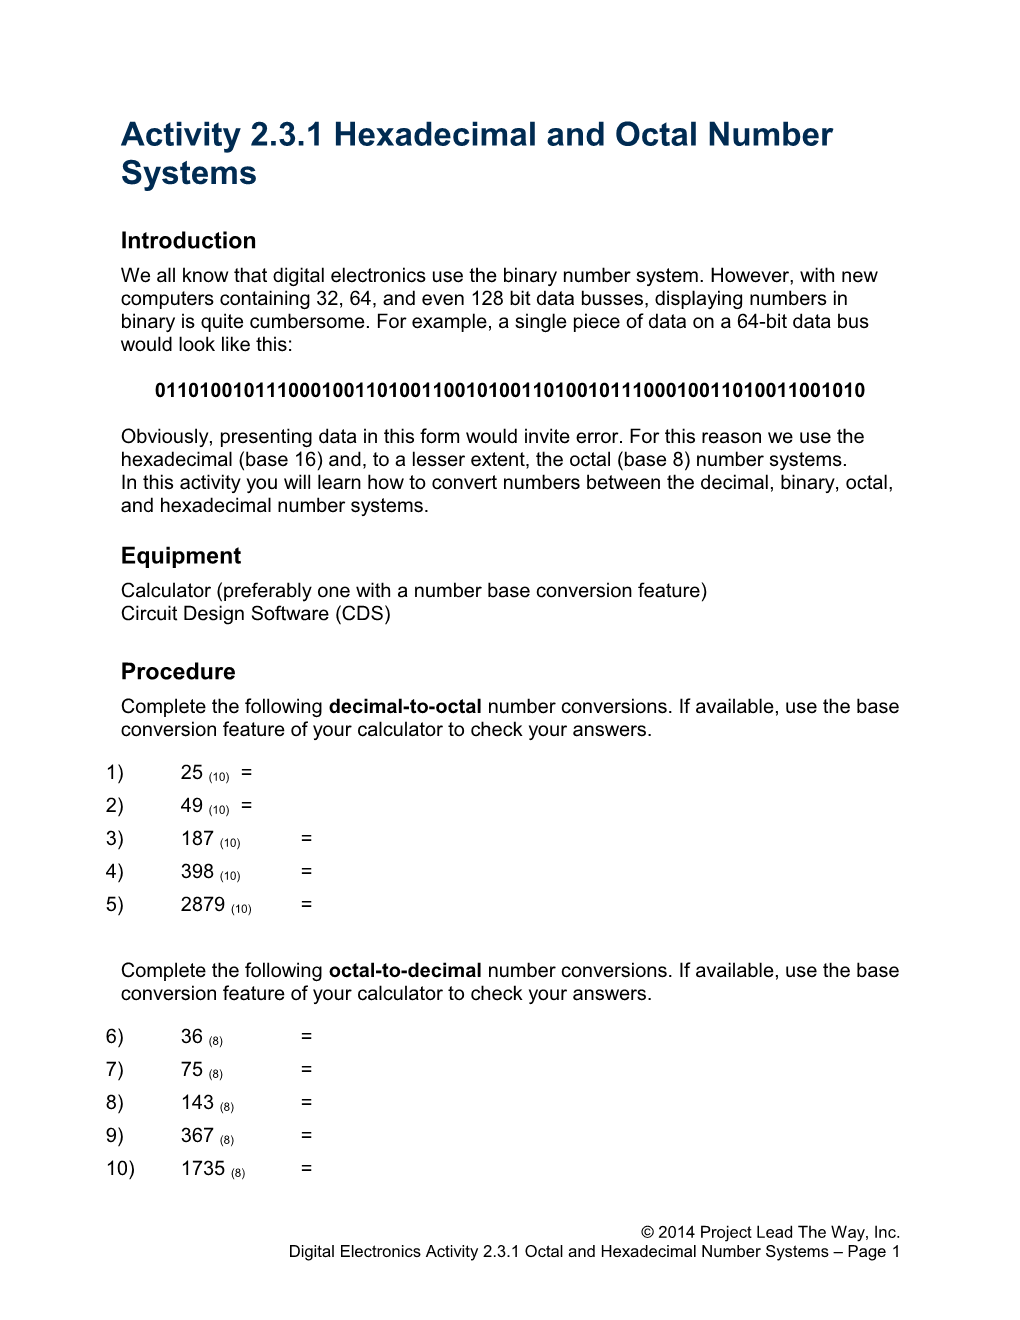 2.3.1.A Hexadecimal Number Systems